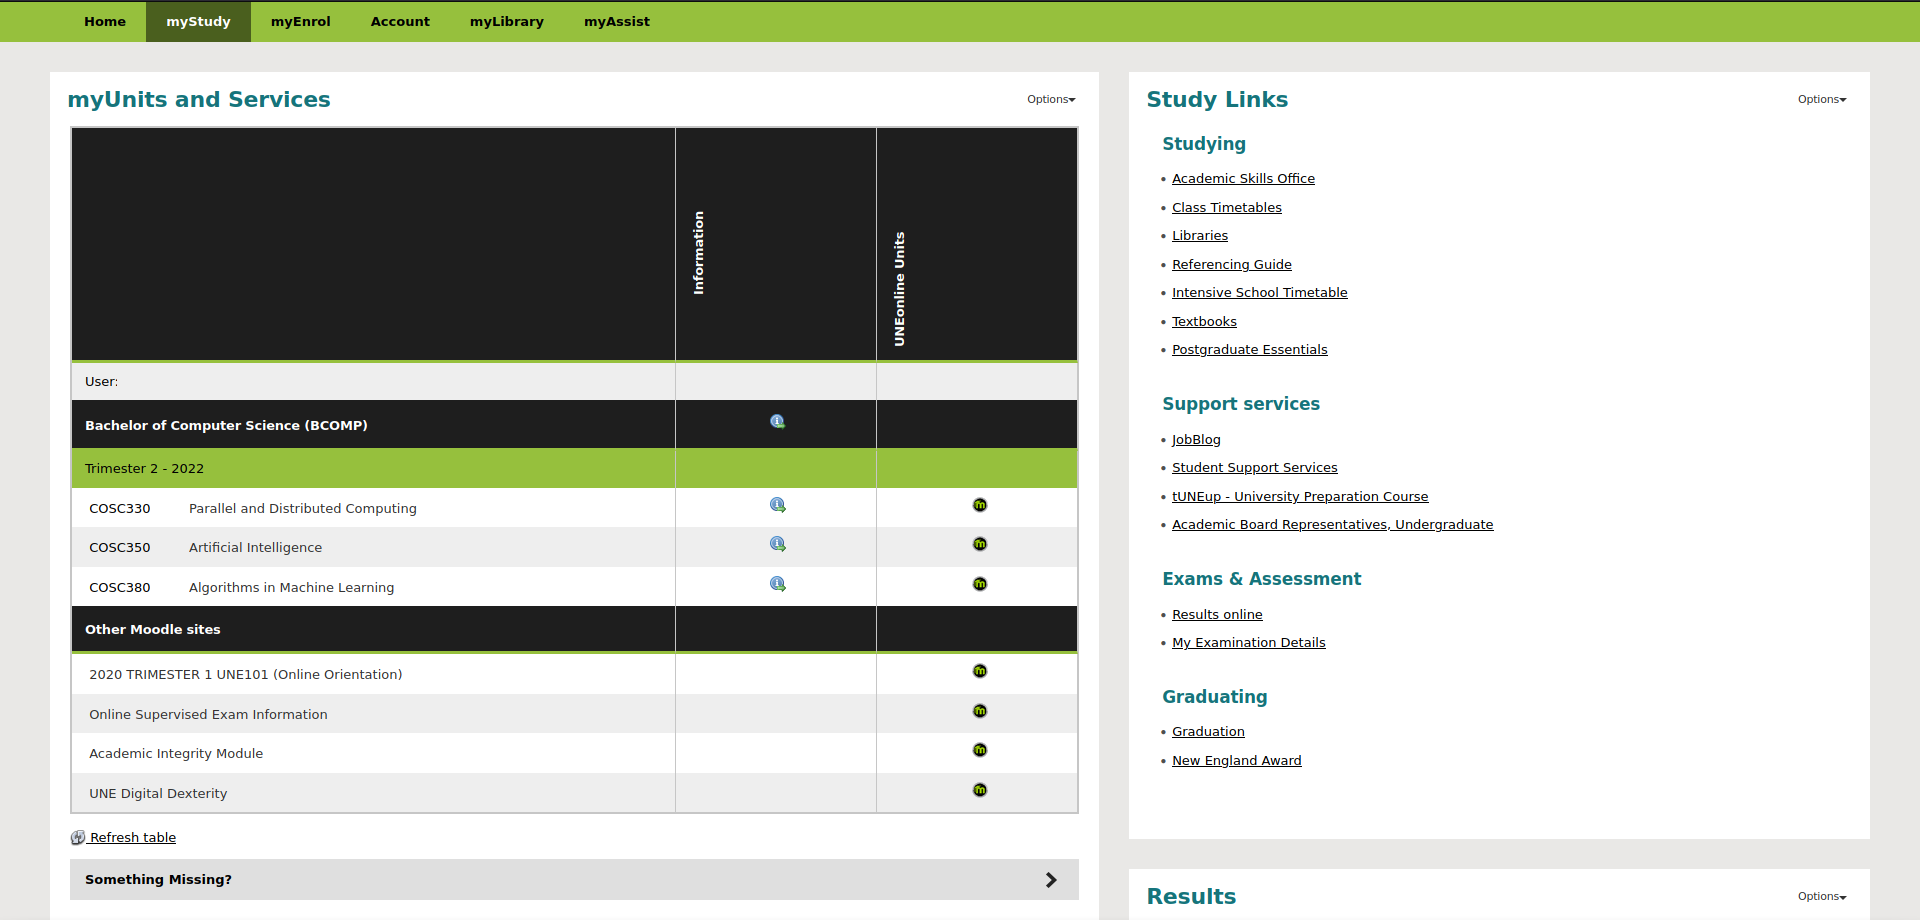 Sample image of the units and services table on the myStudy tab in myUNE